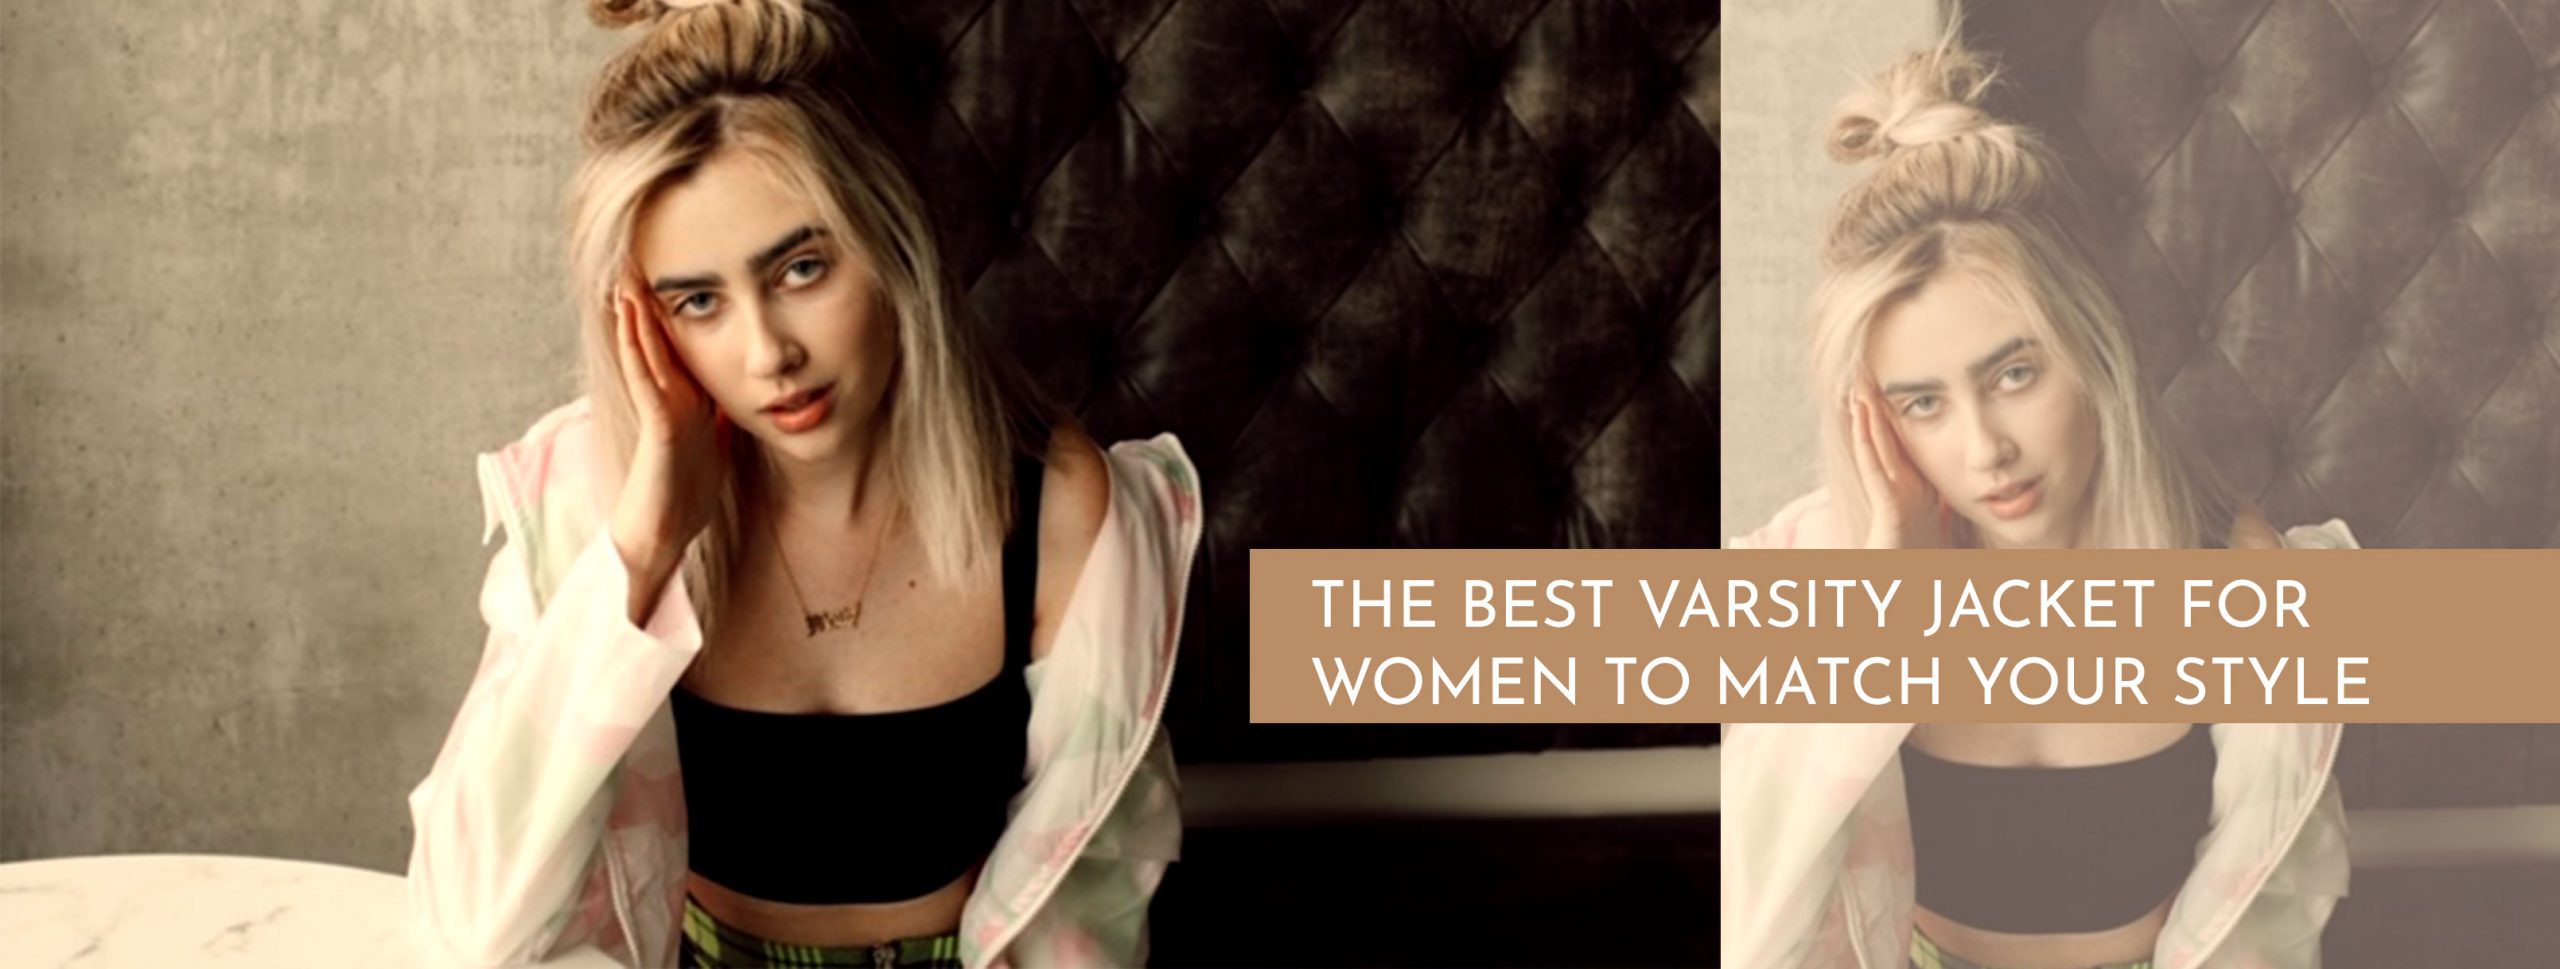 The Best Varsity Jacket For Women To Match Your Style